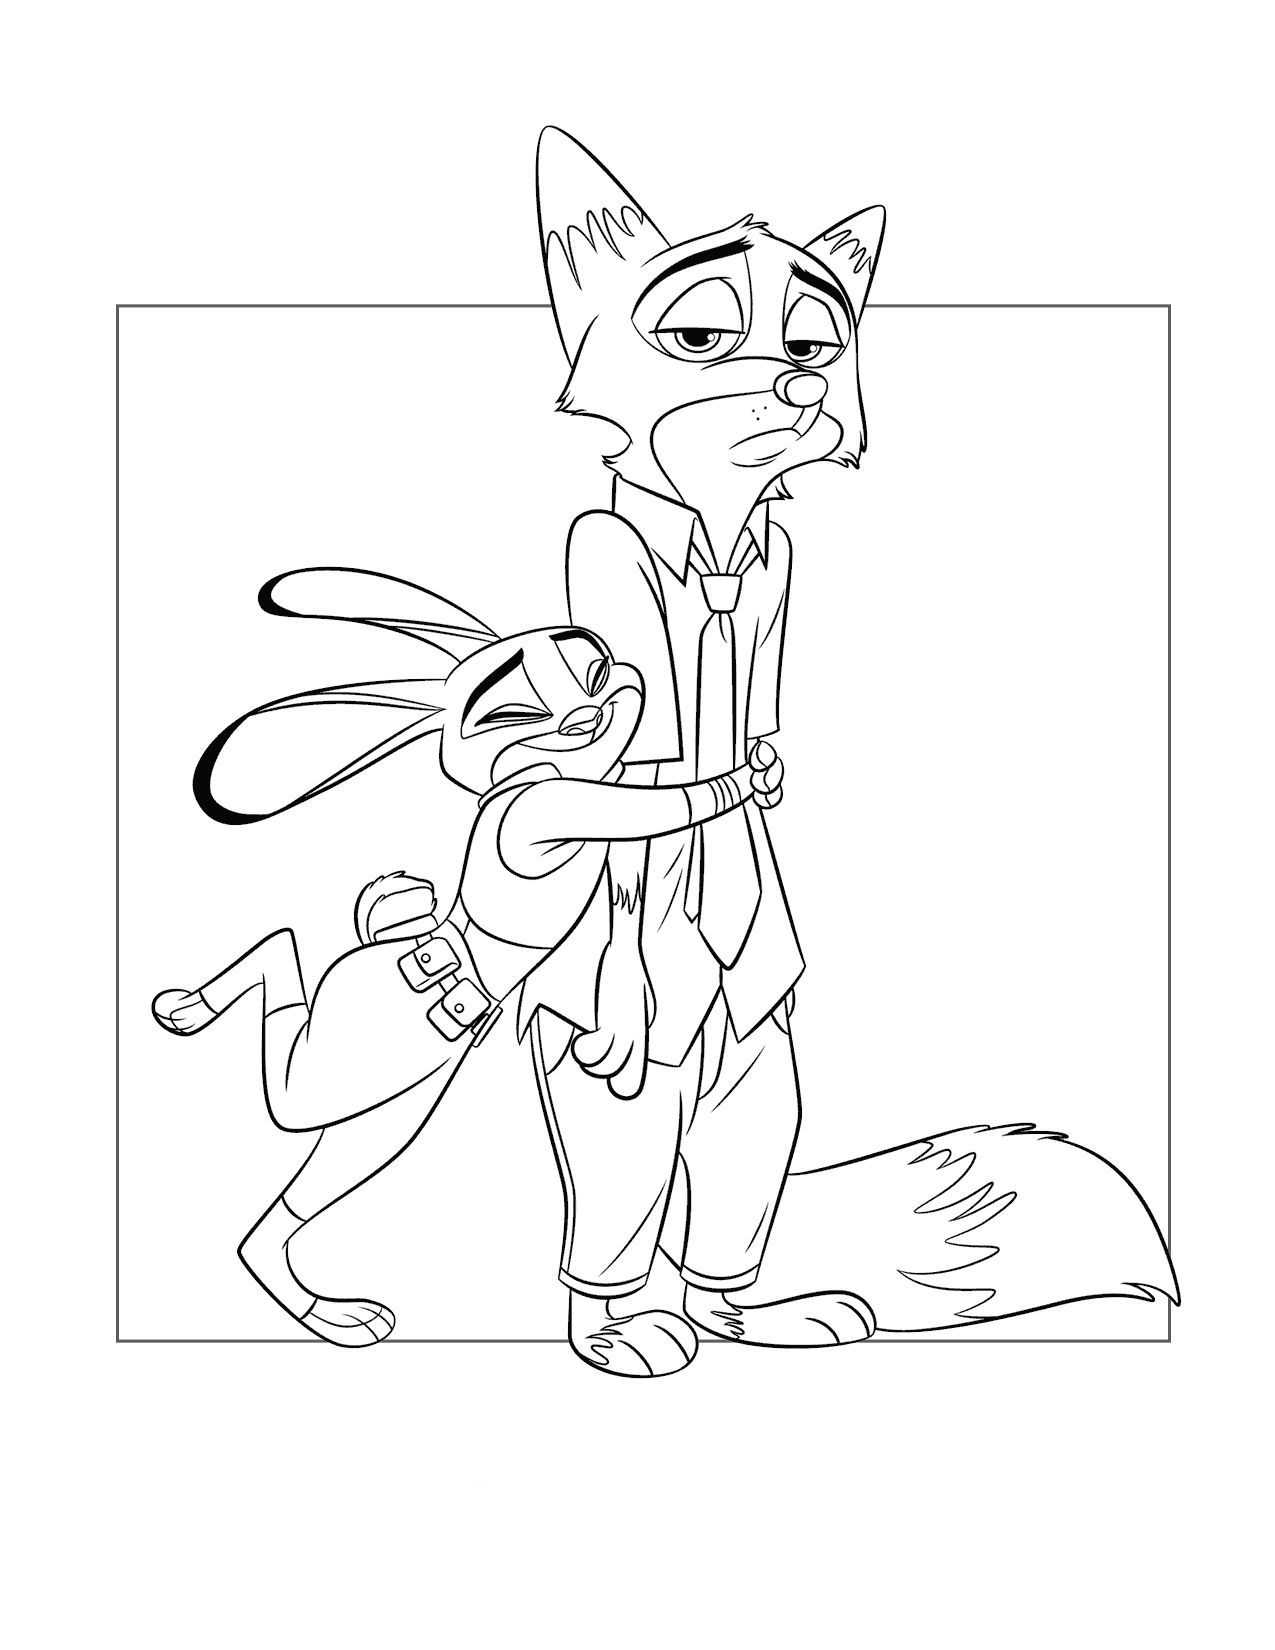 Judy And Nick Zootopia Coloring Page